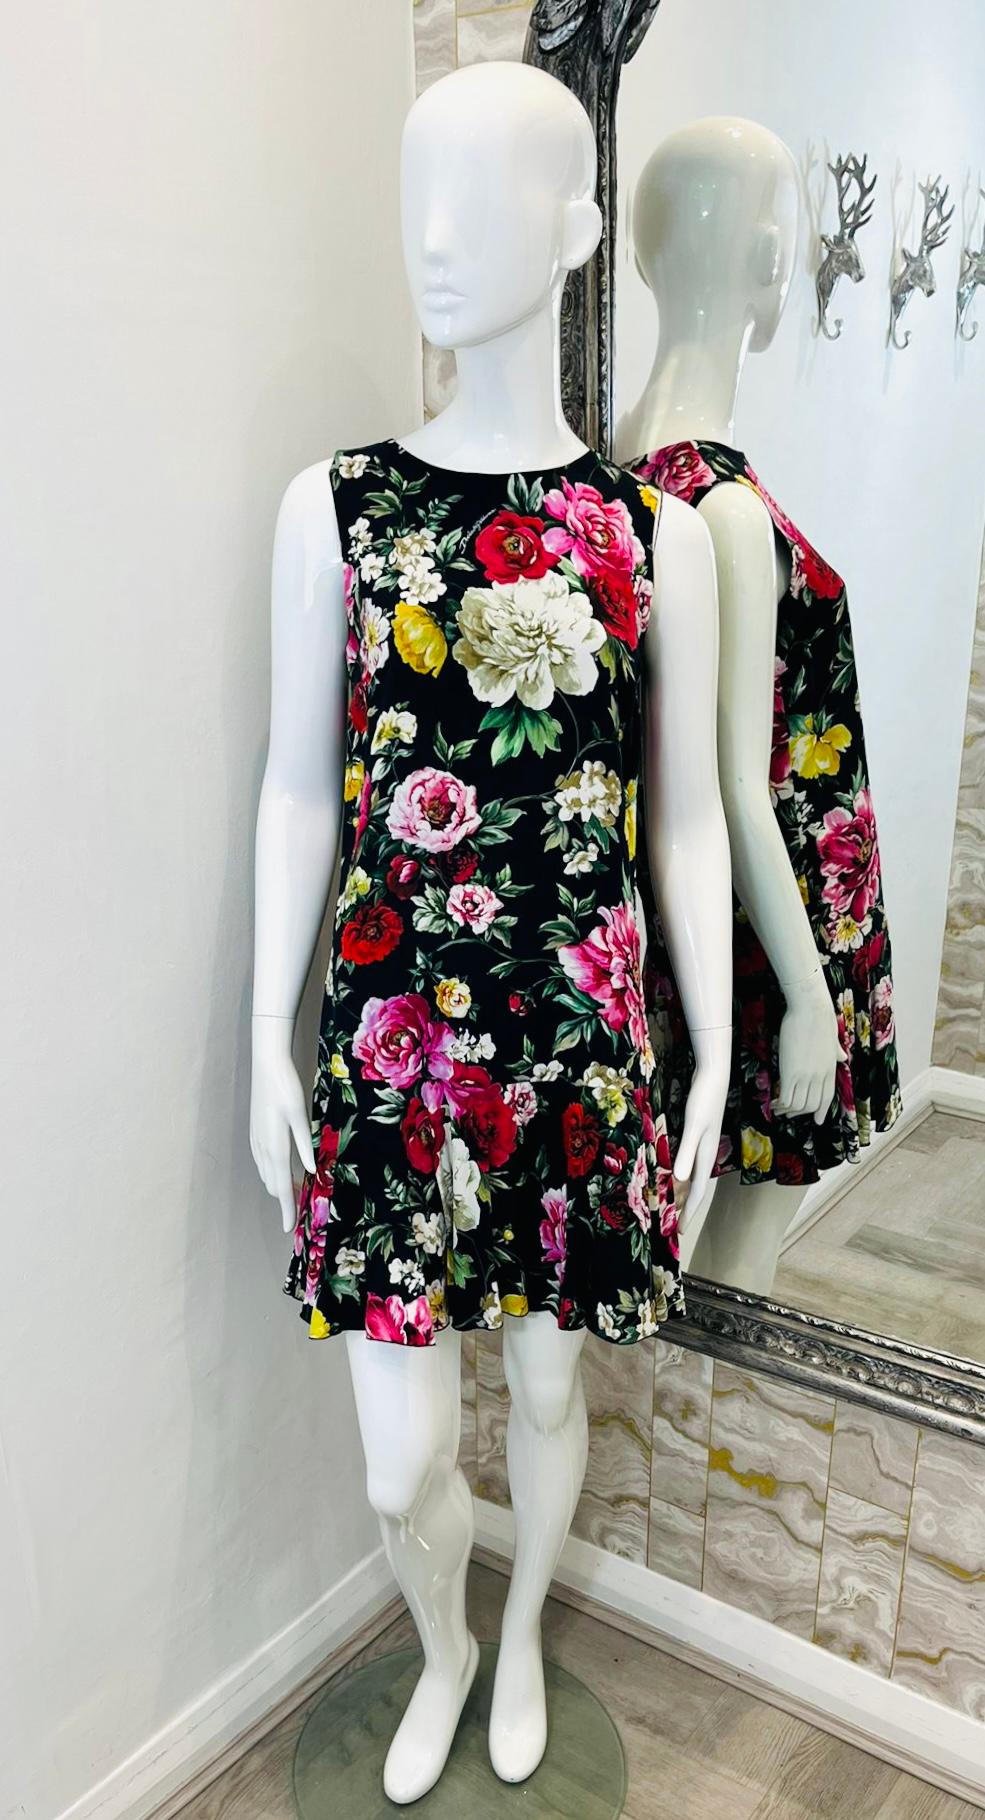 Dolce & Gabbana Floral A-Line Dress

Black dress designed with multicoloured floral prints.

Detailed with flared, mini skirt, round neckline and sleeveless style.

Size – 40IT

Condition – Very Good

Composition – 100% Viscose; Lining 94% Silk, 6%